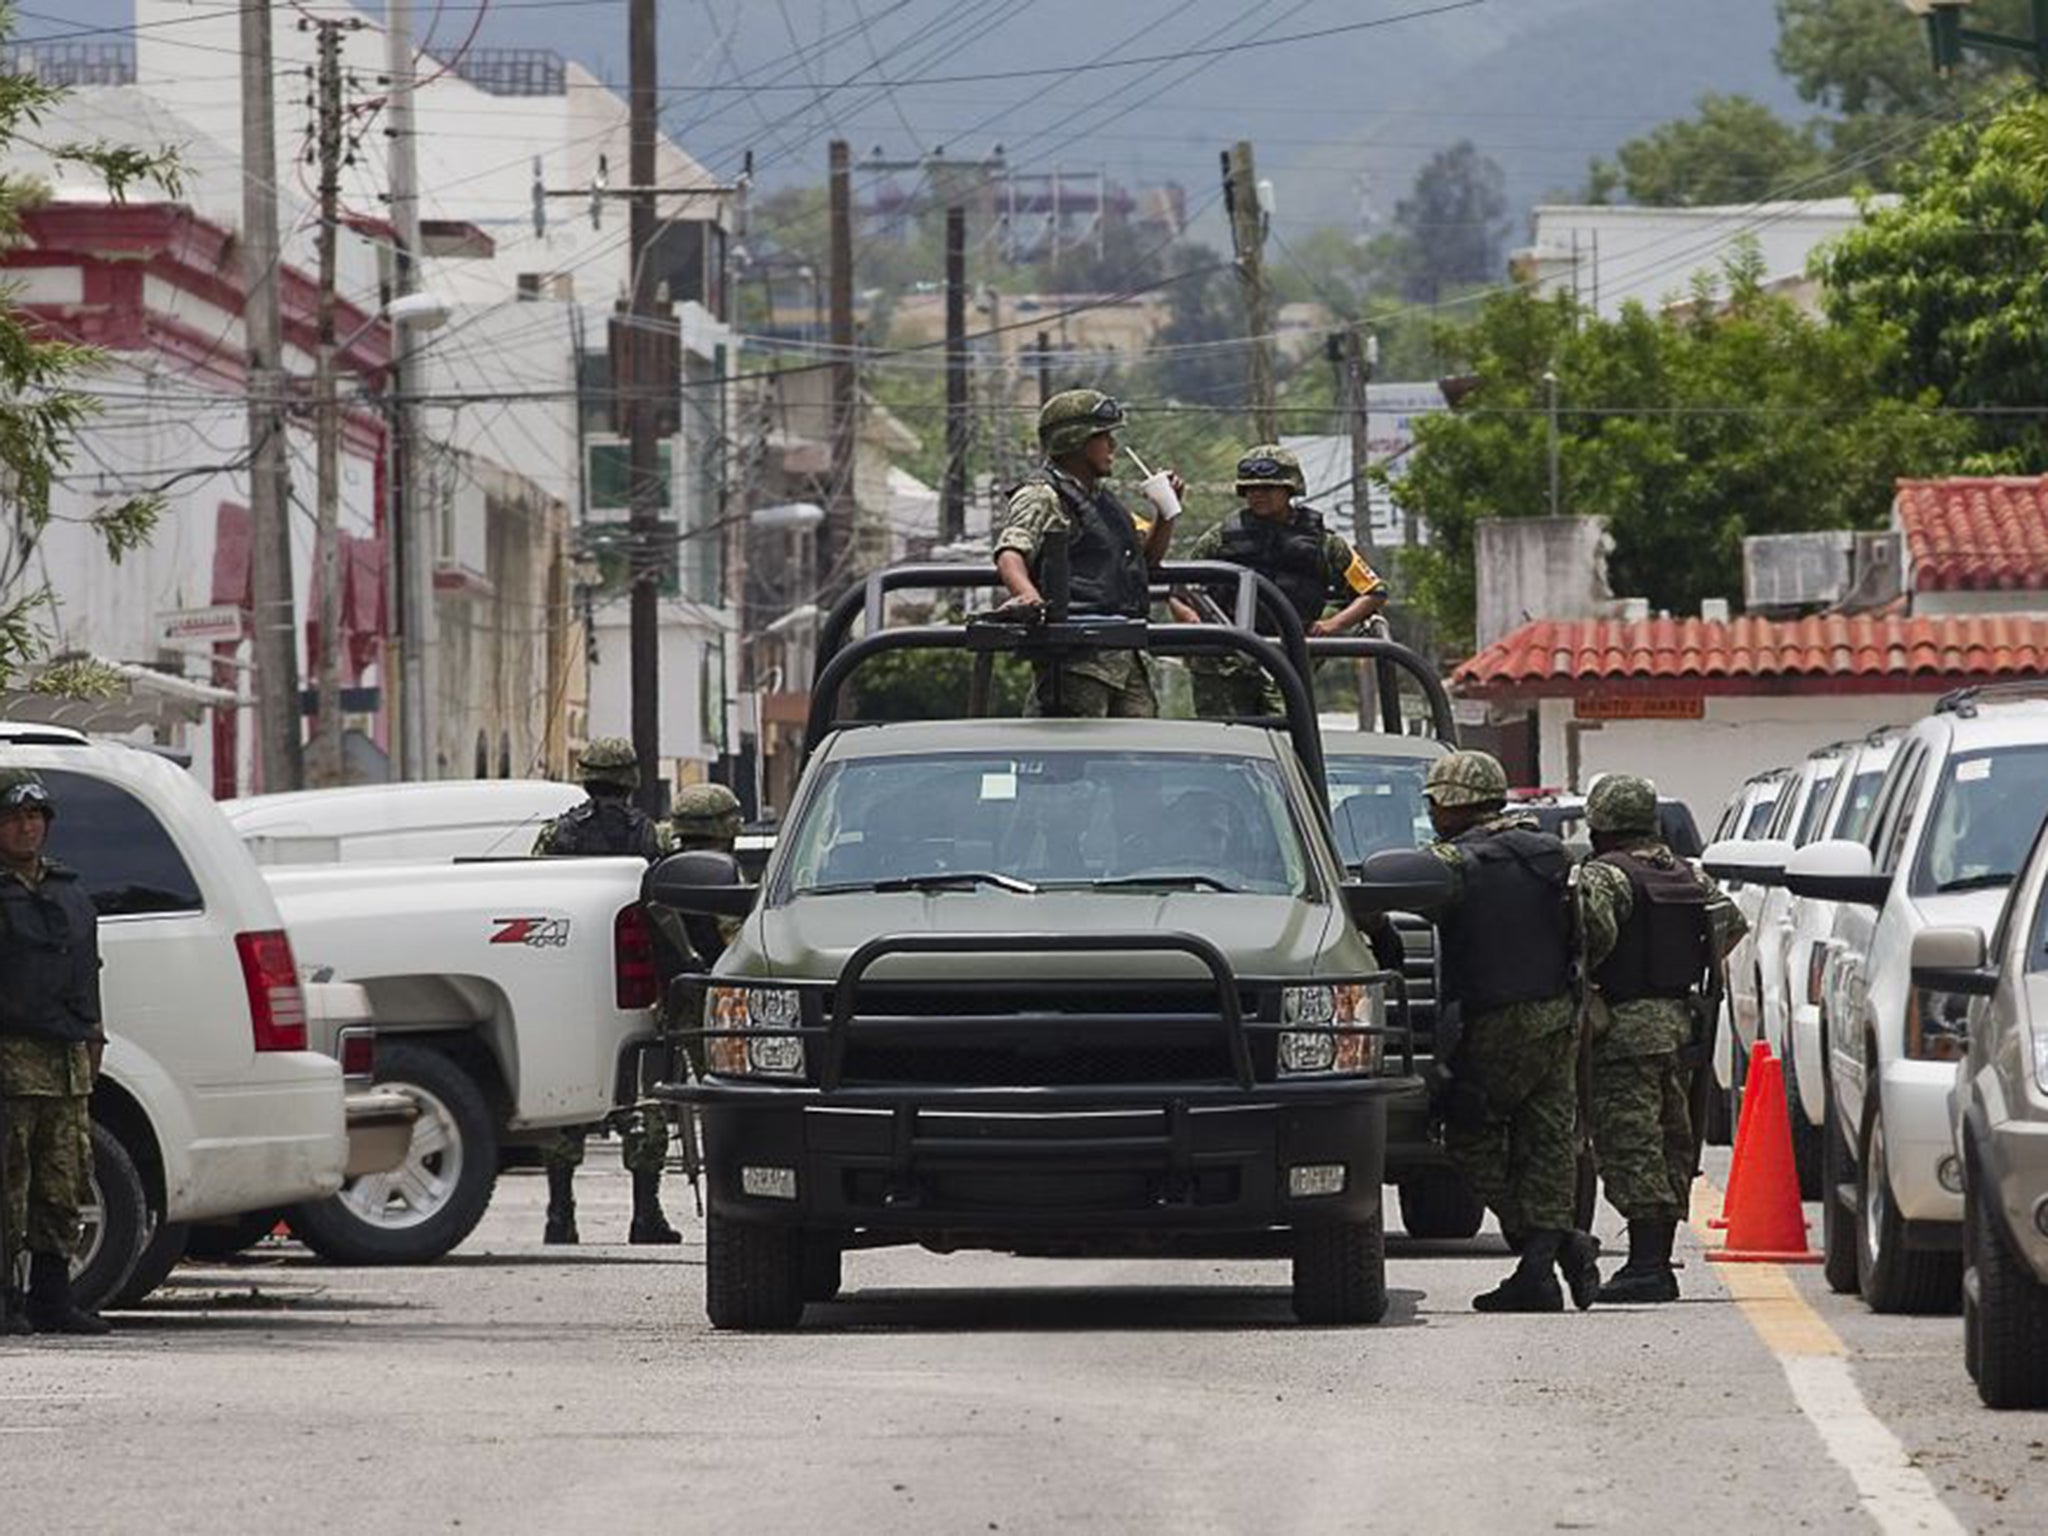 Mexican soldiers on patrol in the cartel stronghold of Ciudad Victoria (AFP/Getty)